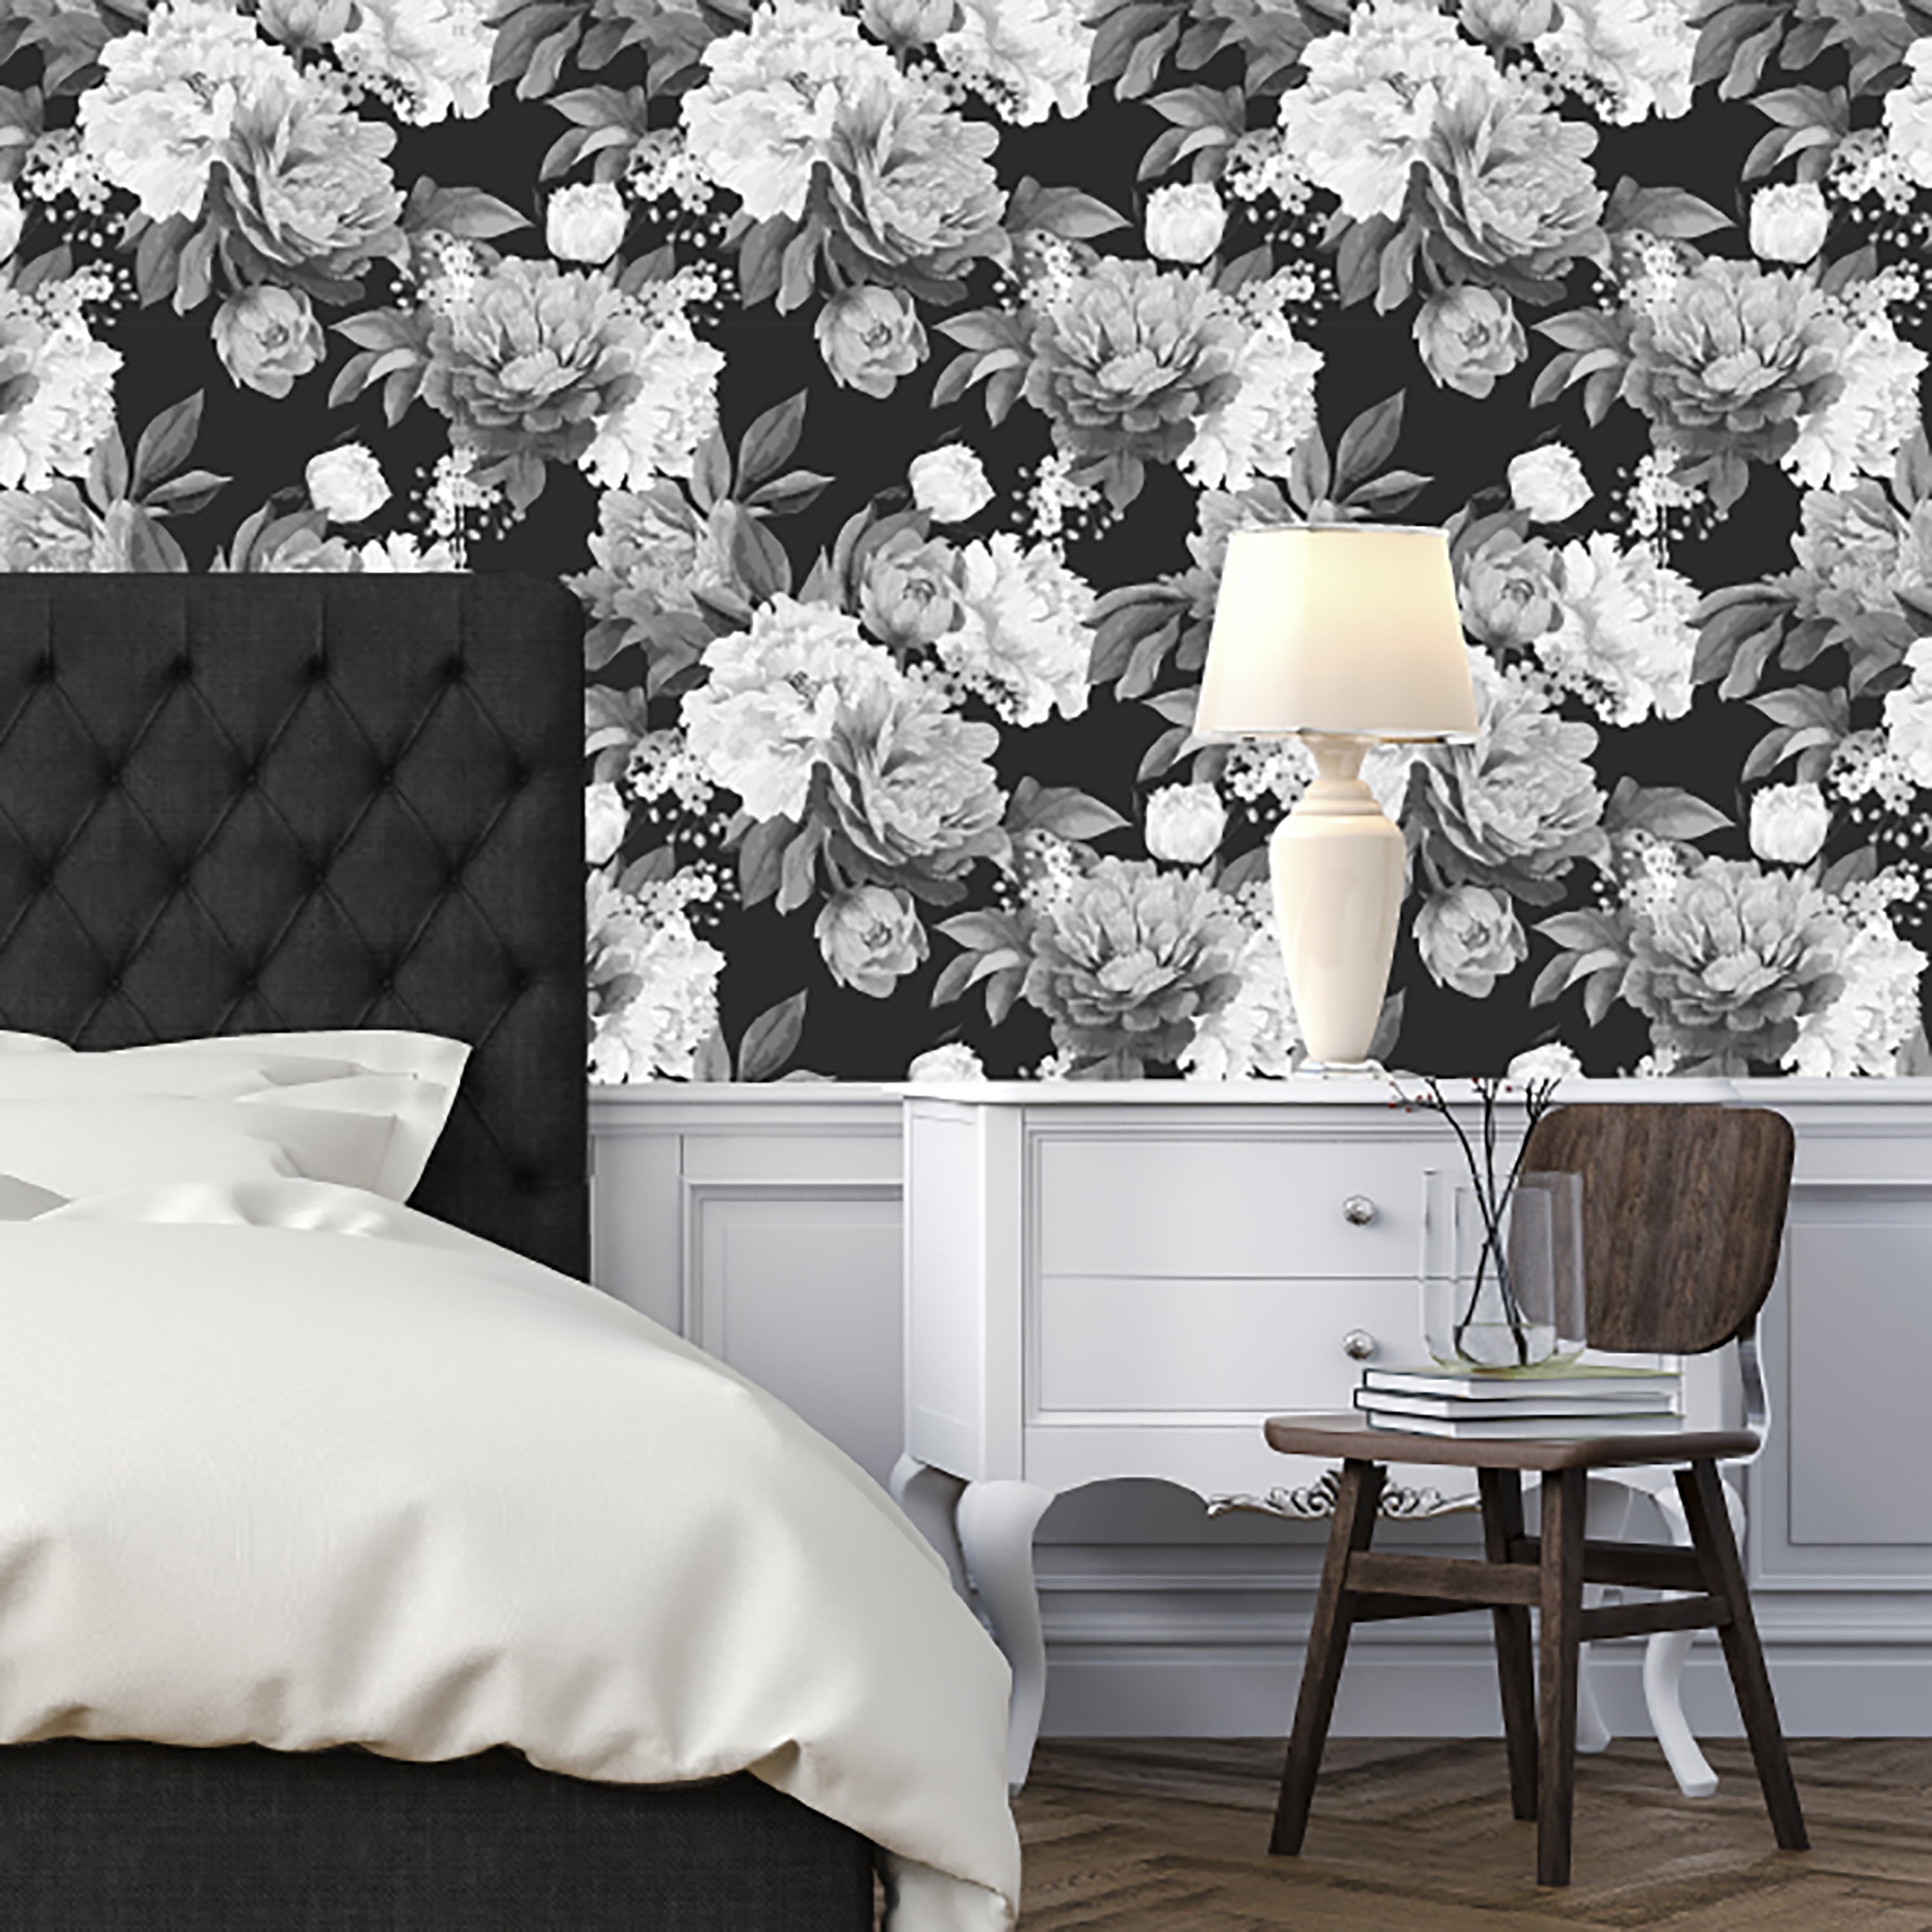 SIMPLIFY Black and White Floral Adhesive Wall Paper 3004-BW - The Home Depot